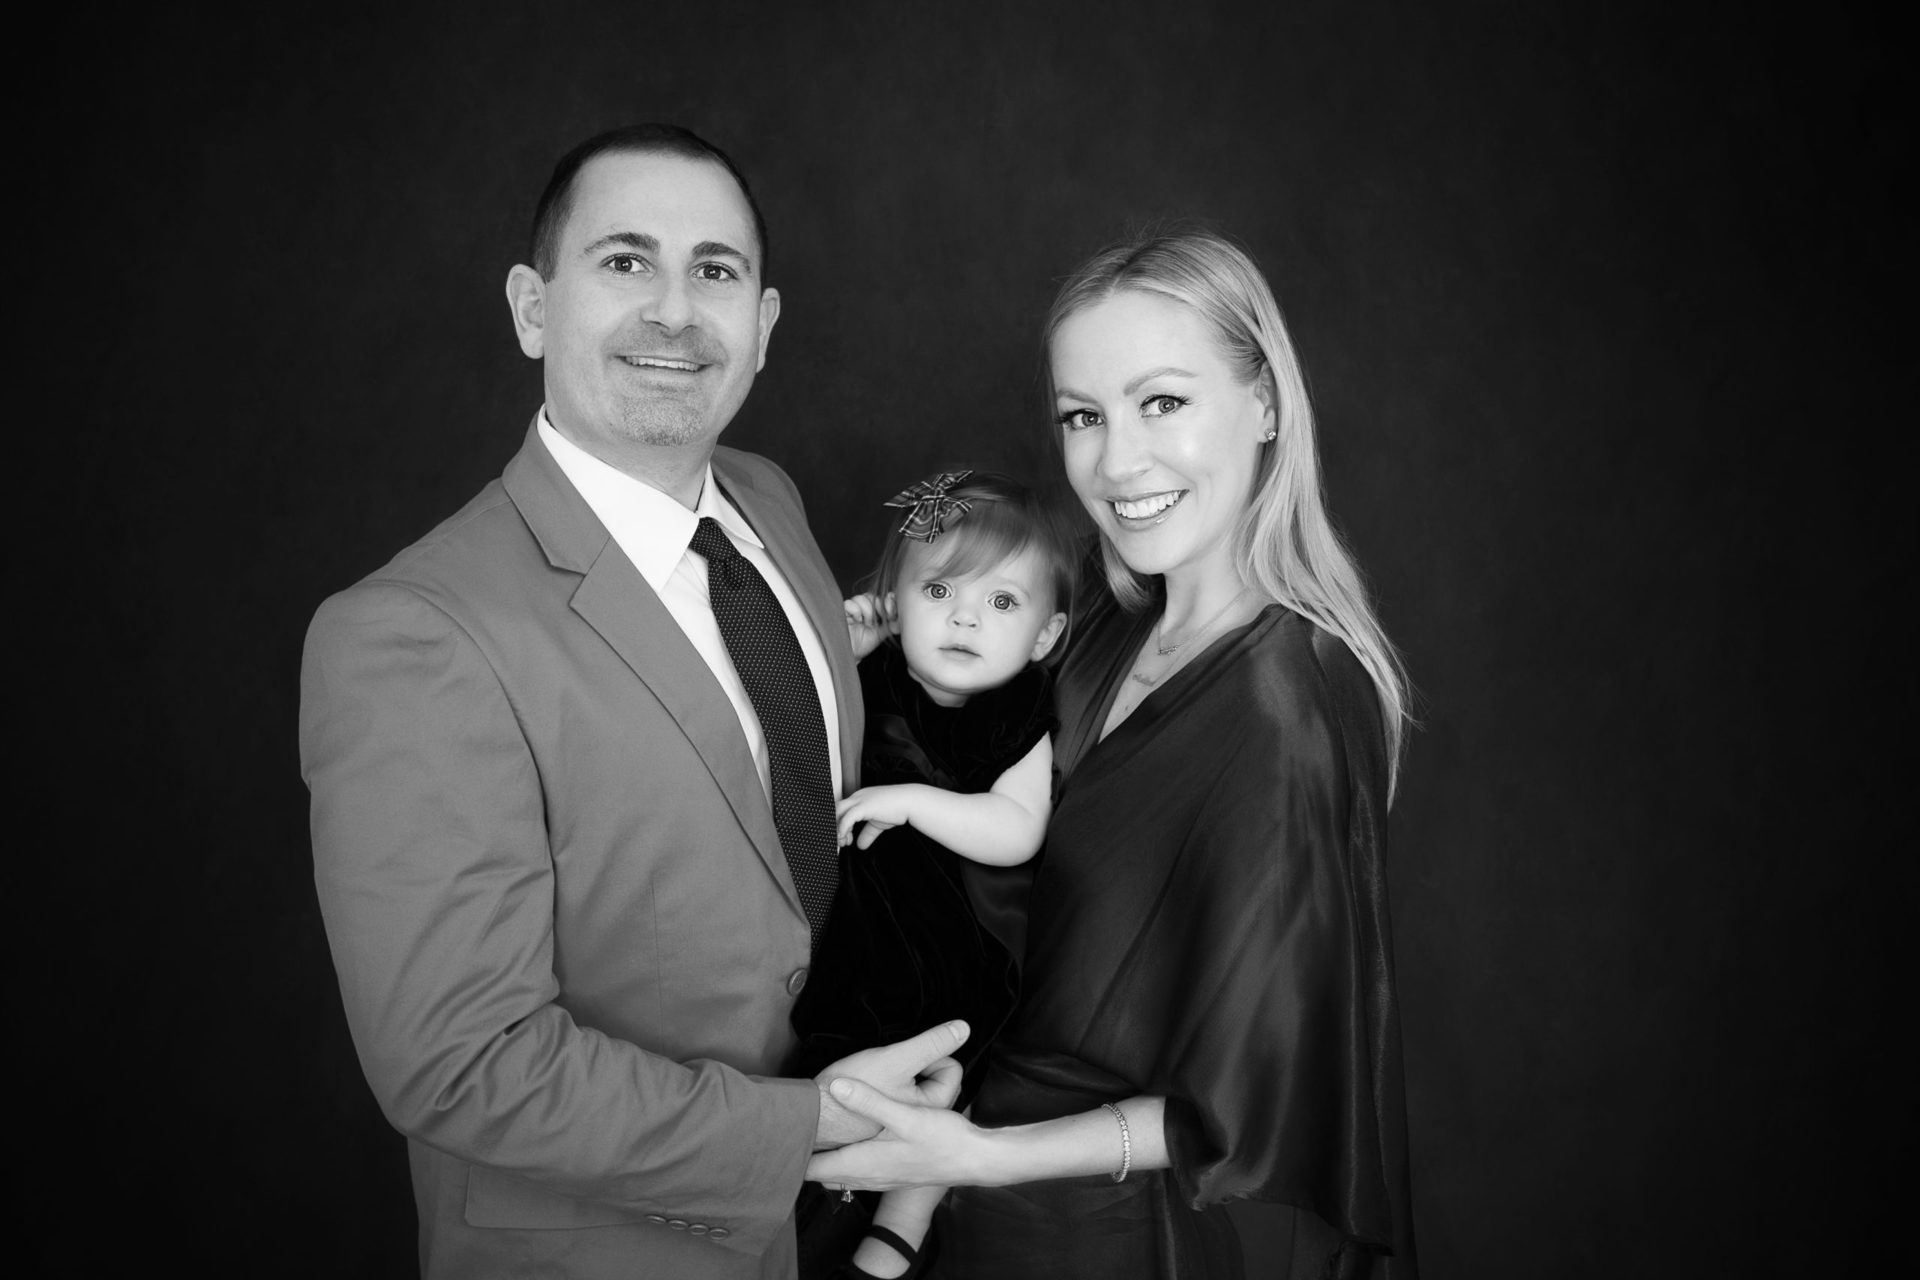 Family black and white photo shows father, mother and one year old daughter posing indoors. Father wear a tie, mom and daughter in dresses.